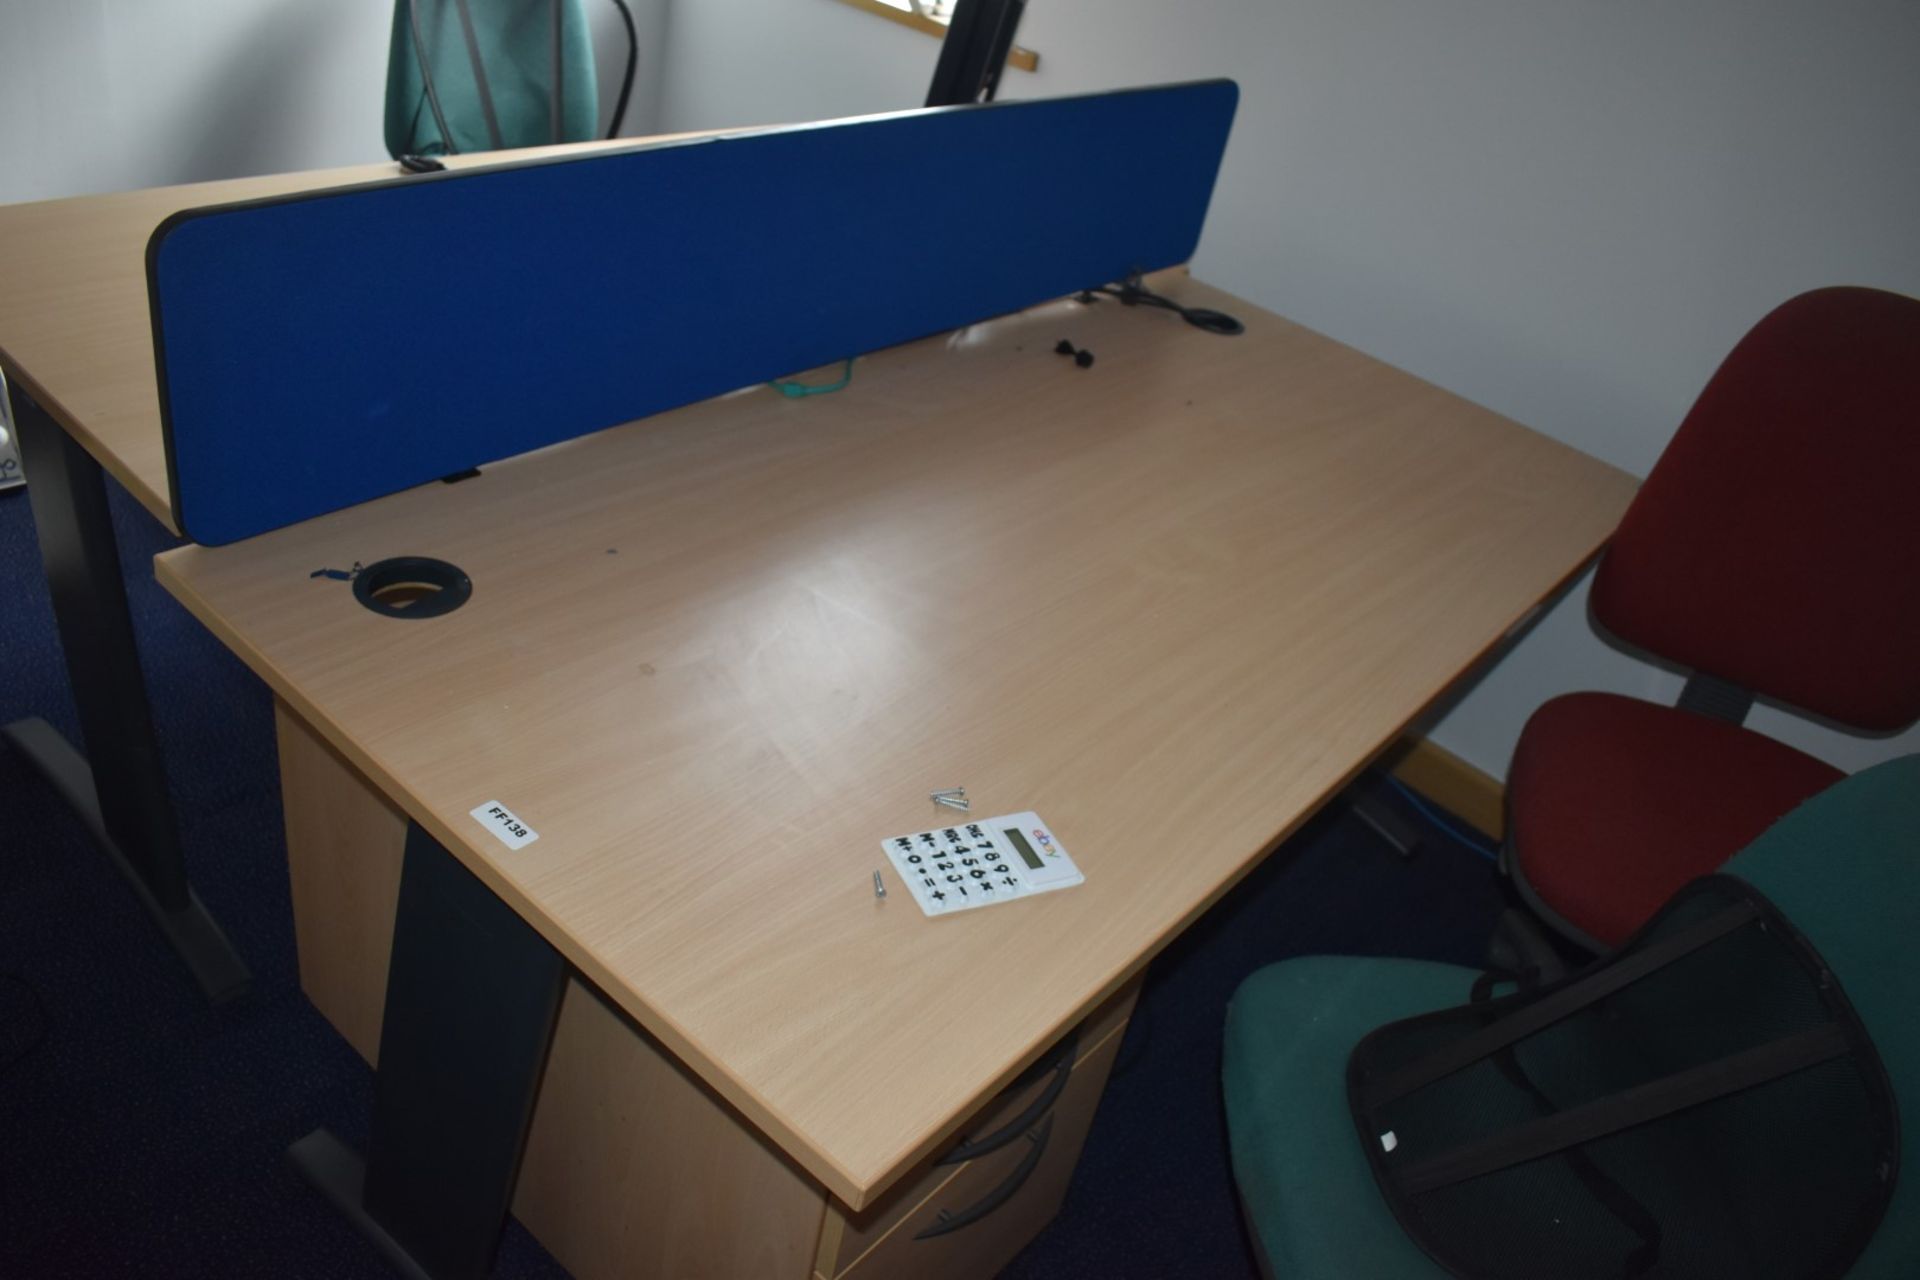 1 x Assorted Collection of Office Furniture - Includes 2 x 160cm Office Desks, 3 x Swivel Chairs, - Image 7 of 7